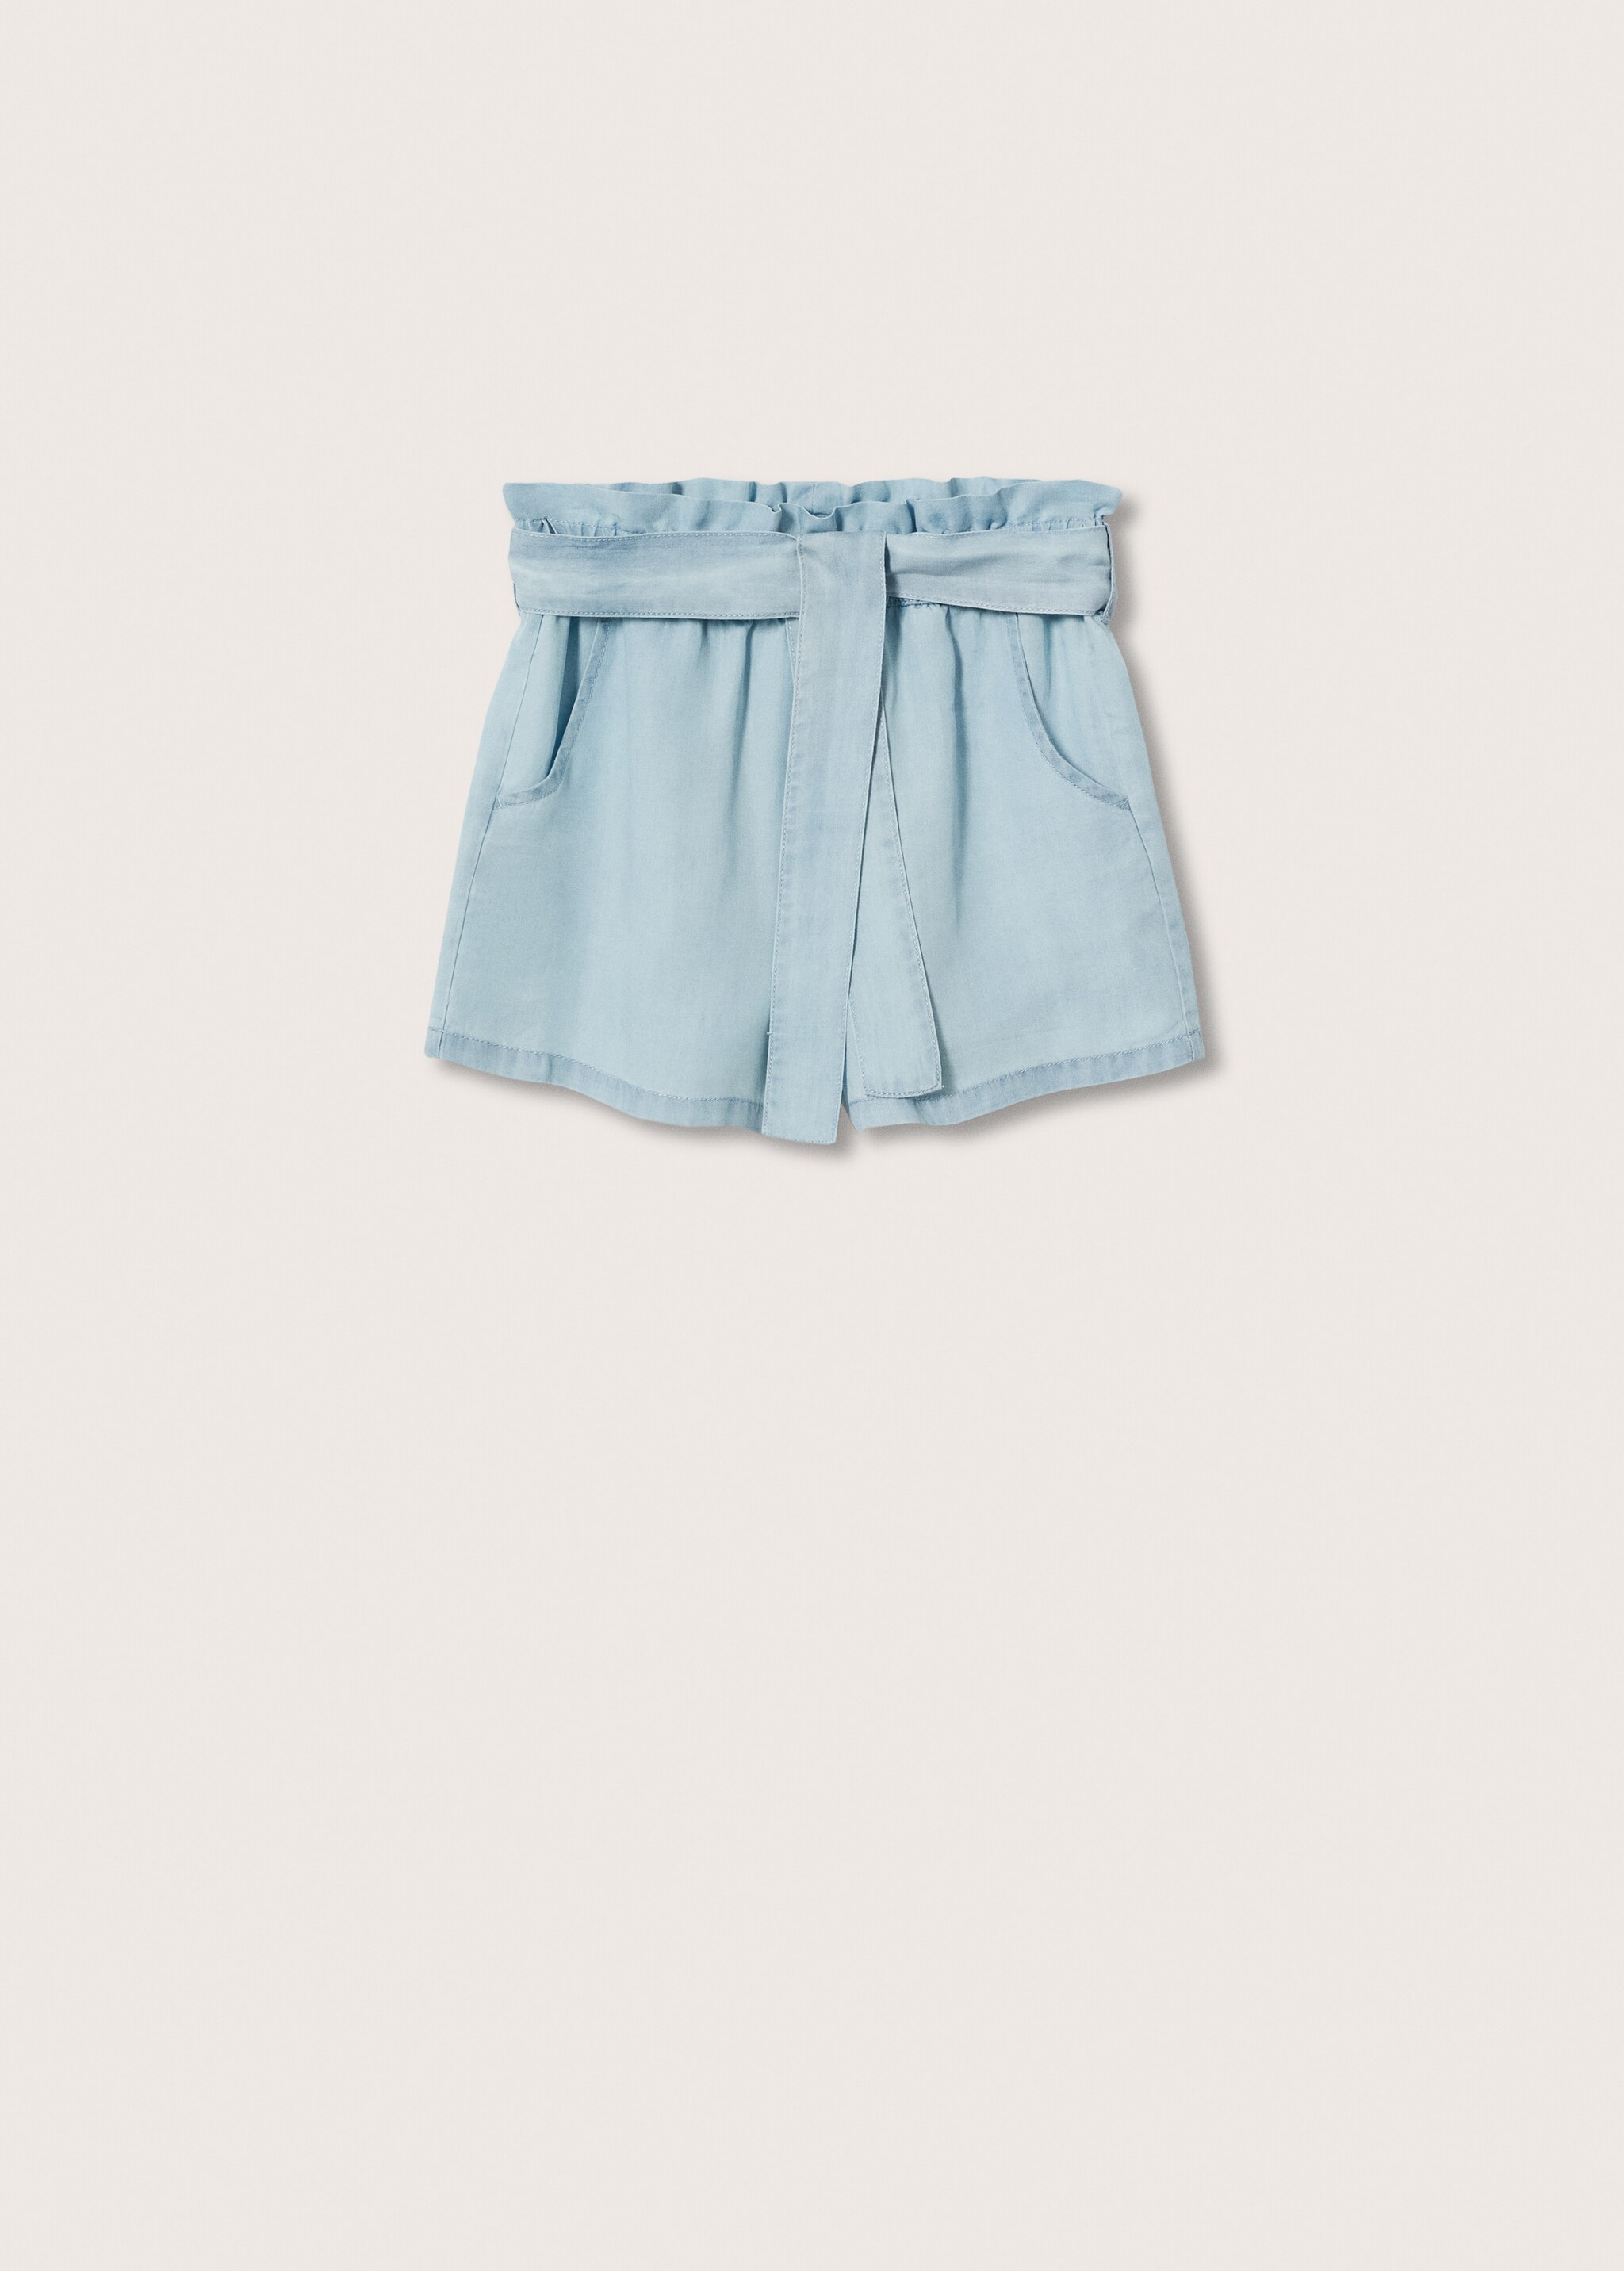 Bow lyocell shorts - Article without model